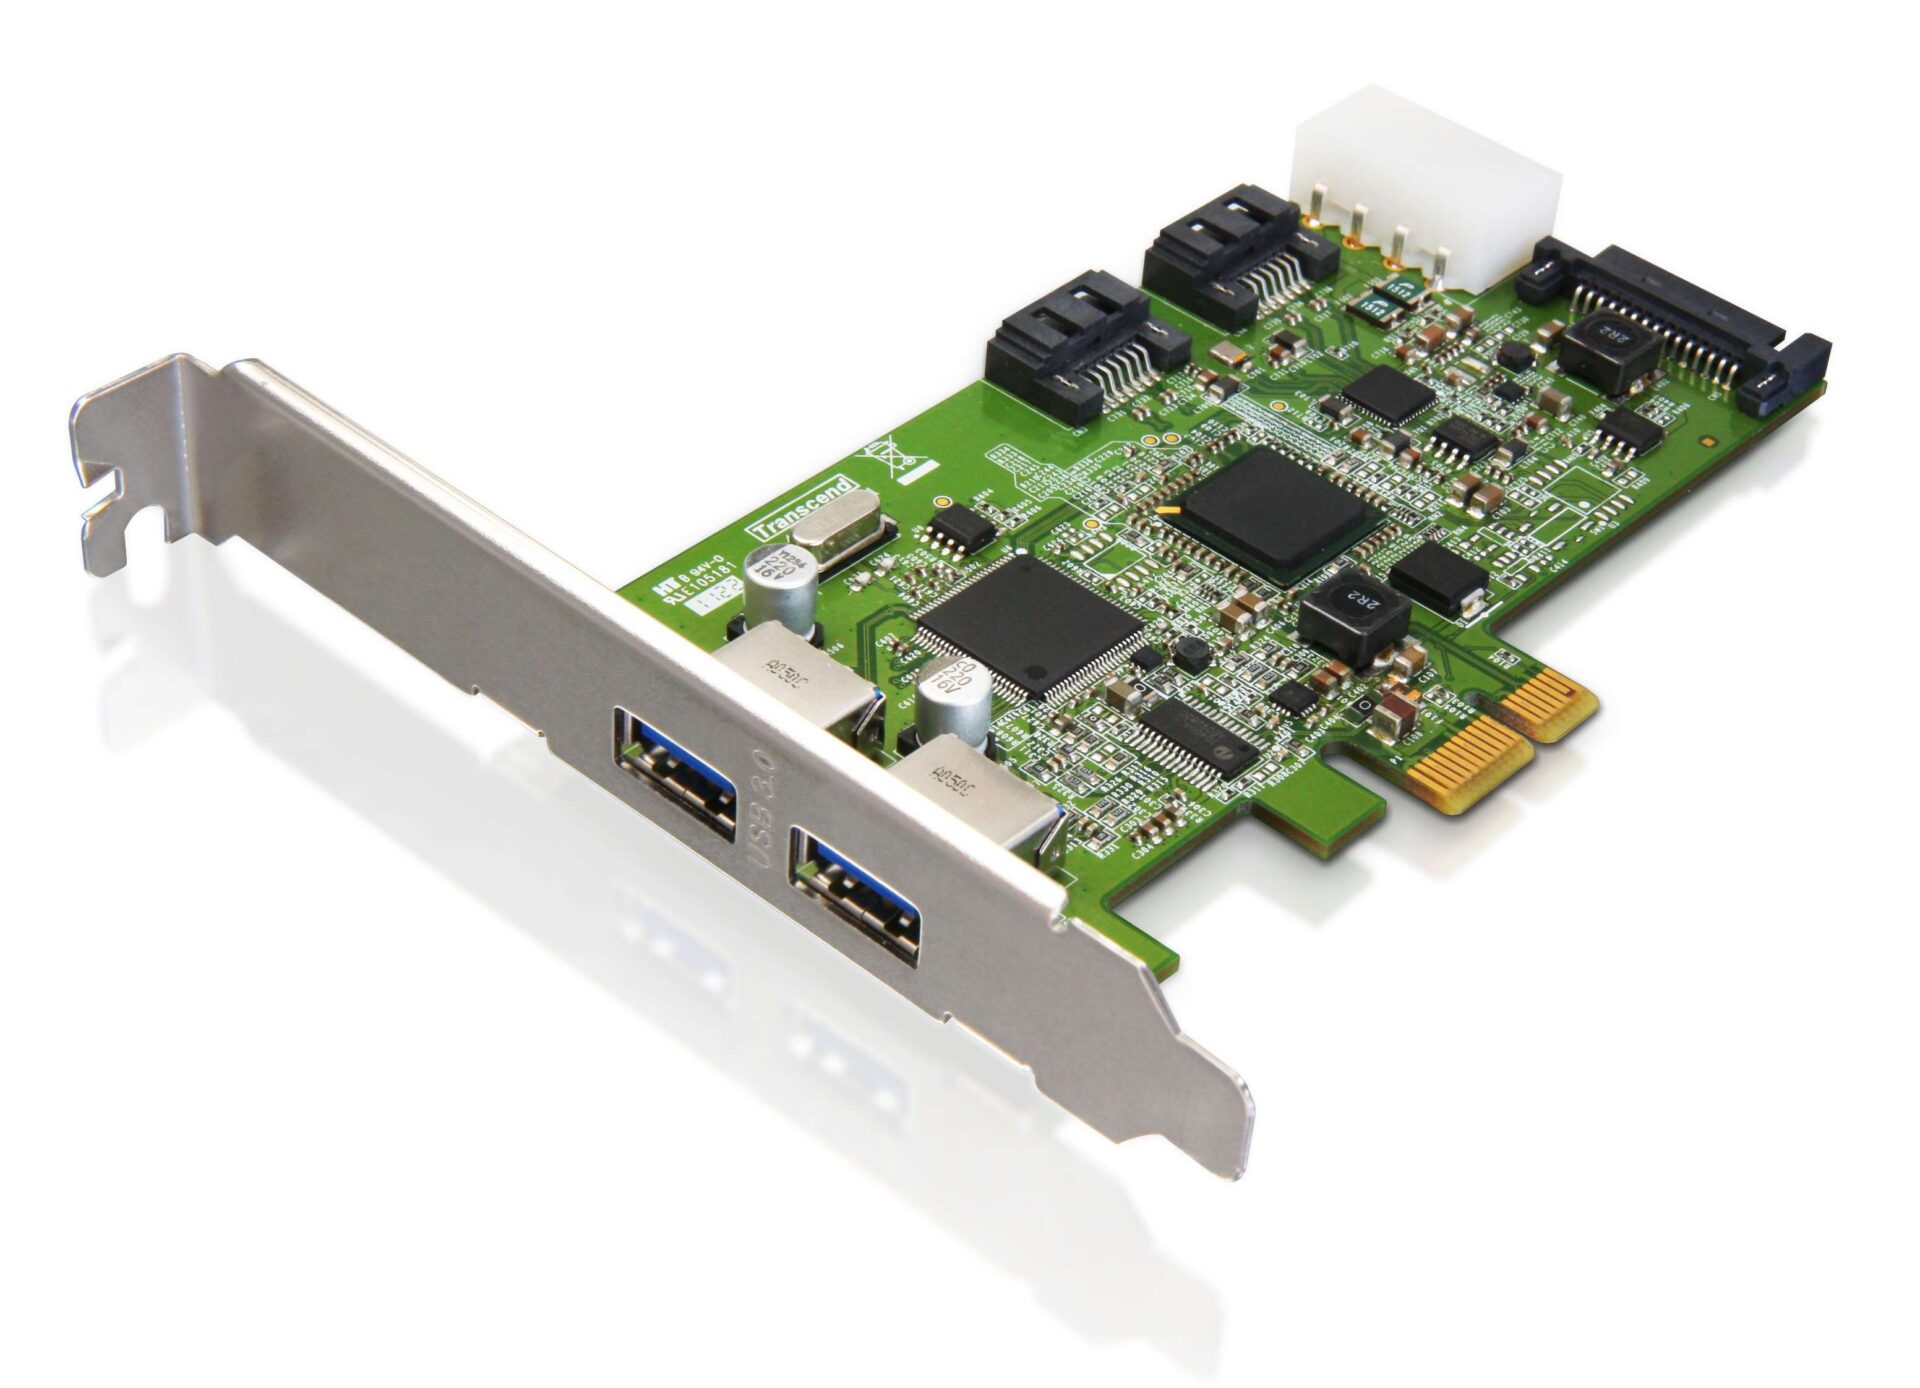 The PCIe-based/embedded plugin HSMs segment is expected to grow at a CAGR of 16.5% during the forecast period (2022-2032).